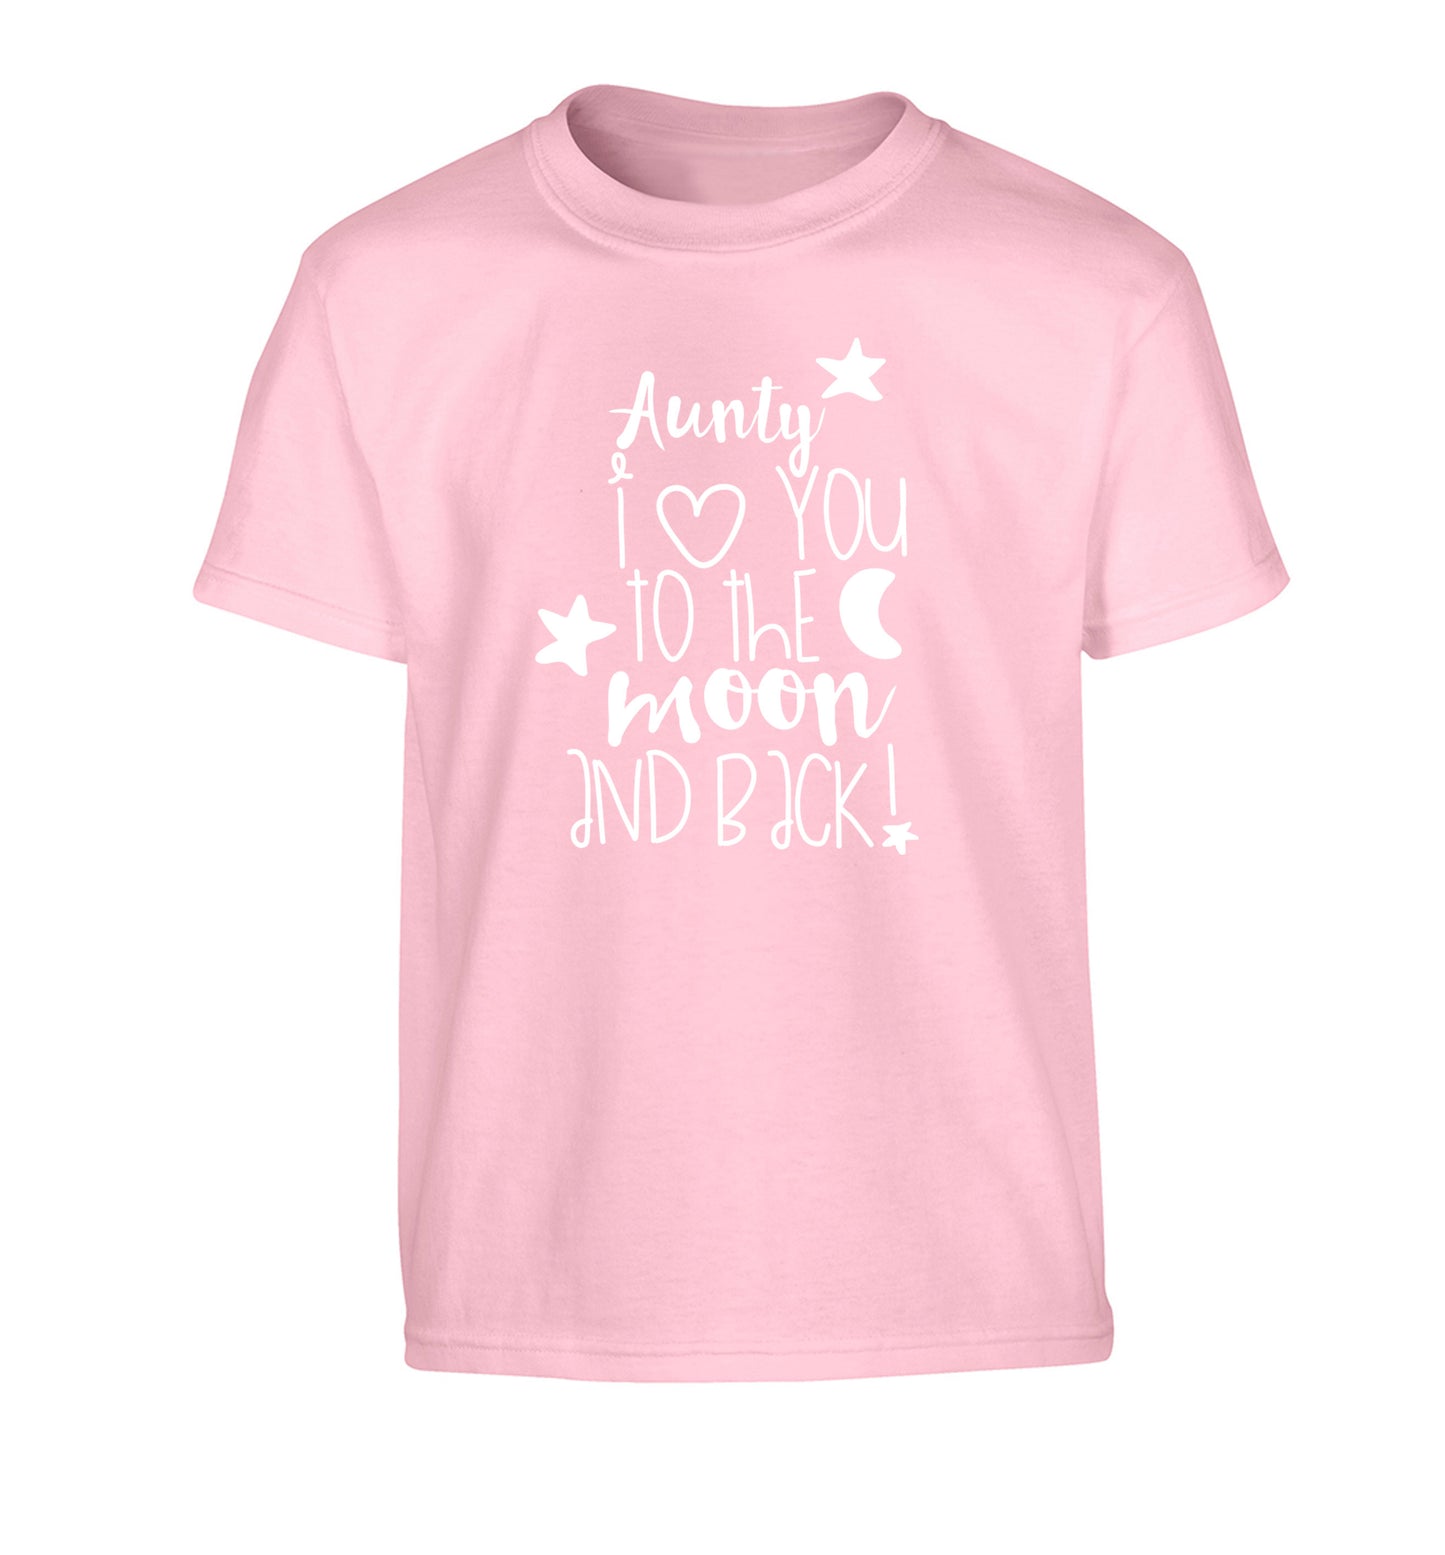 Aunty I love you to the moon and back Children's light pink Tshirt 12-14 Years